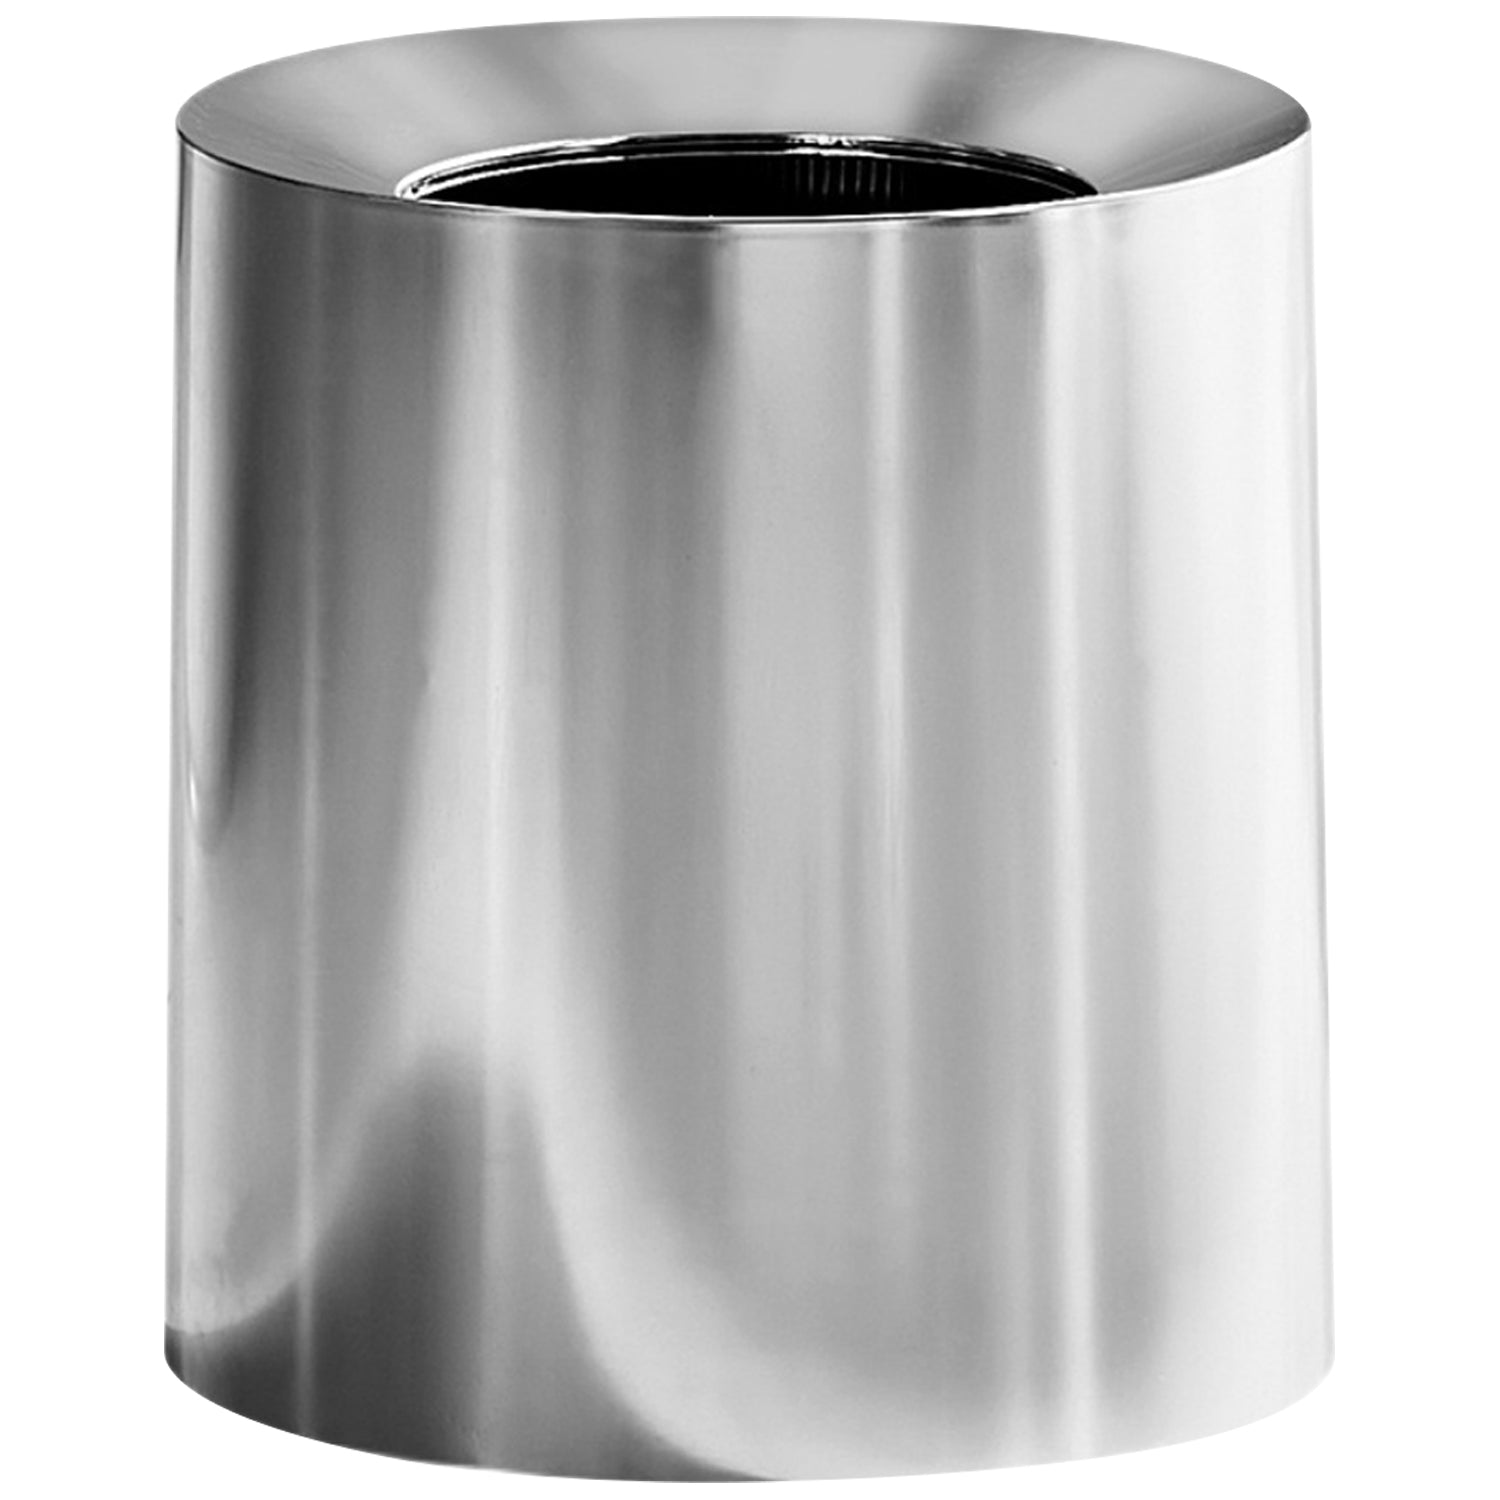 Load image into Gallery viewer, Modern Stainless Spill-Proof Trash Can | 12-Liter (3.2-Gallon) Open Top Kitchen Trash Can